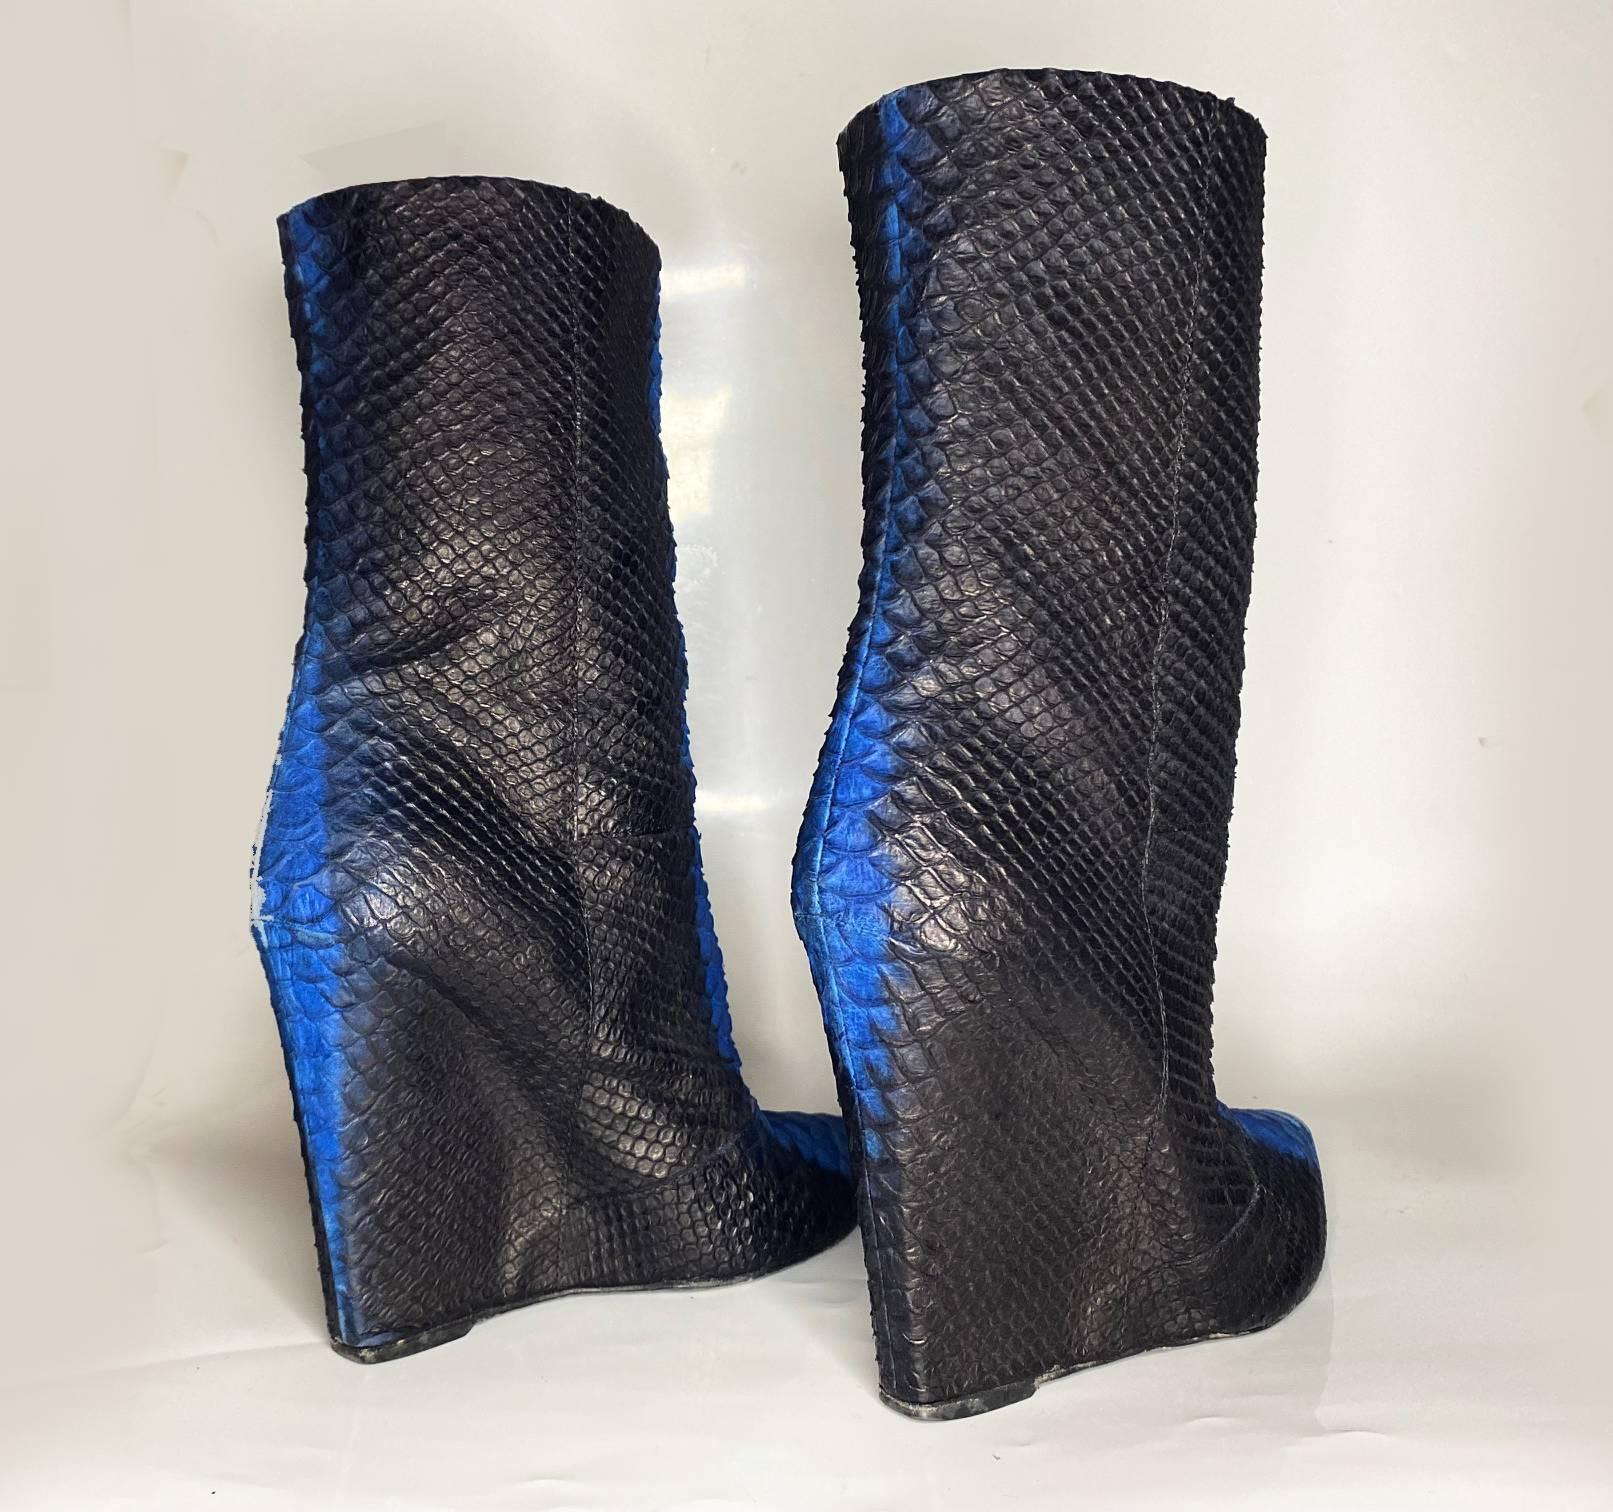 These 2000s Giuseppe Zanotti boots boast genuine craftsmanship and quality materials for a sleek, textured leather finish. The rubber outsole ensures both style and comfort, making them the ideal choice for your collection.

Size: 37 Italian / 4 UK